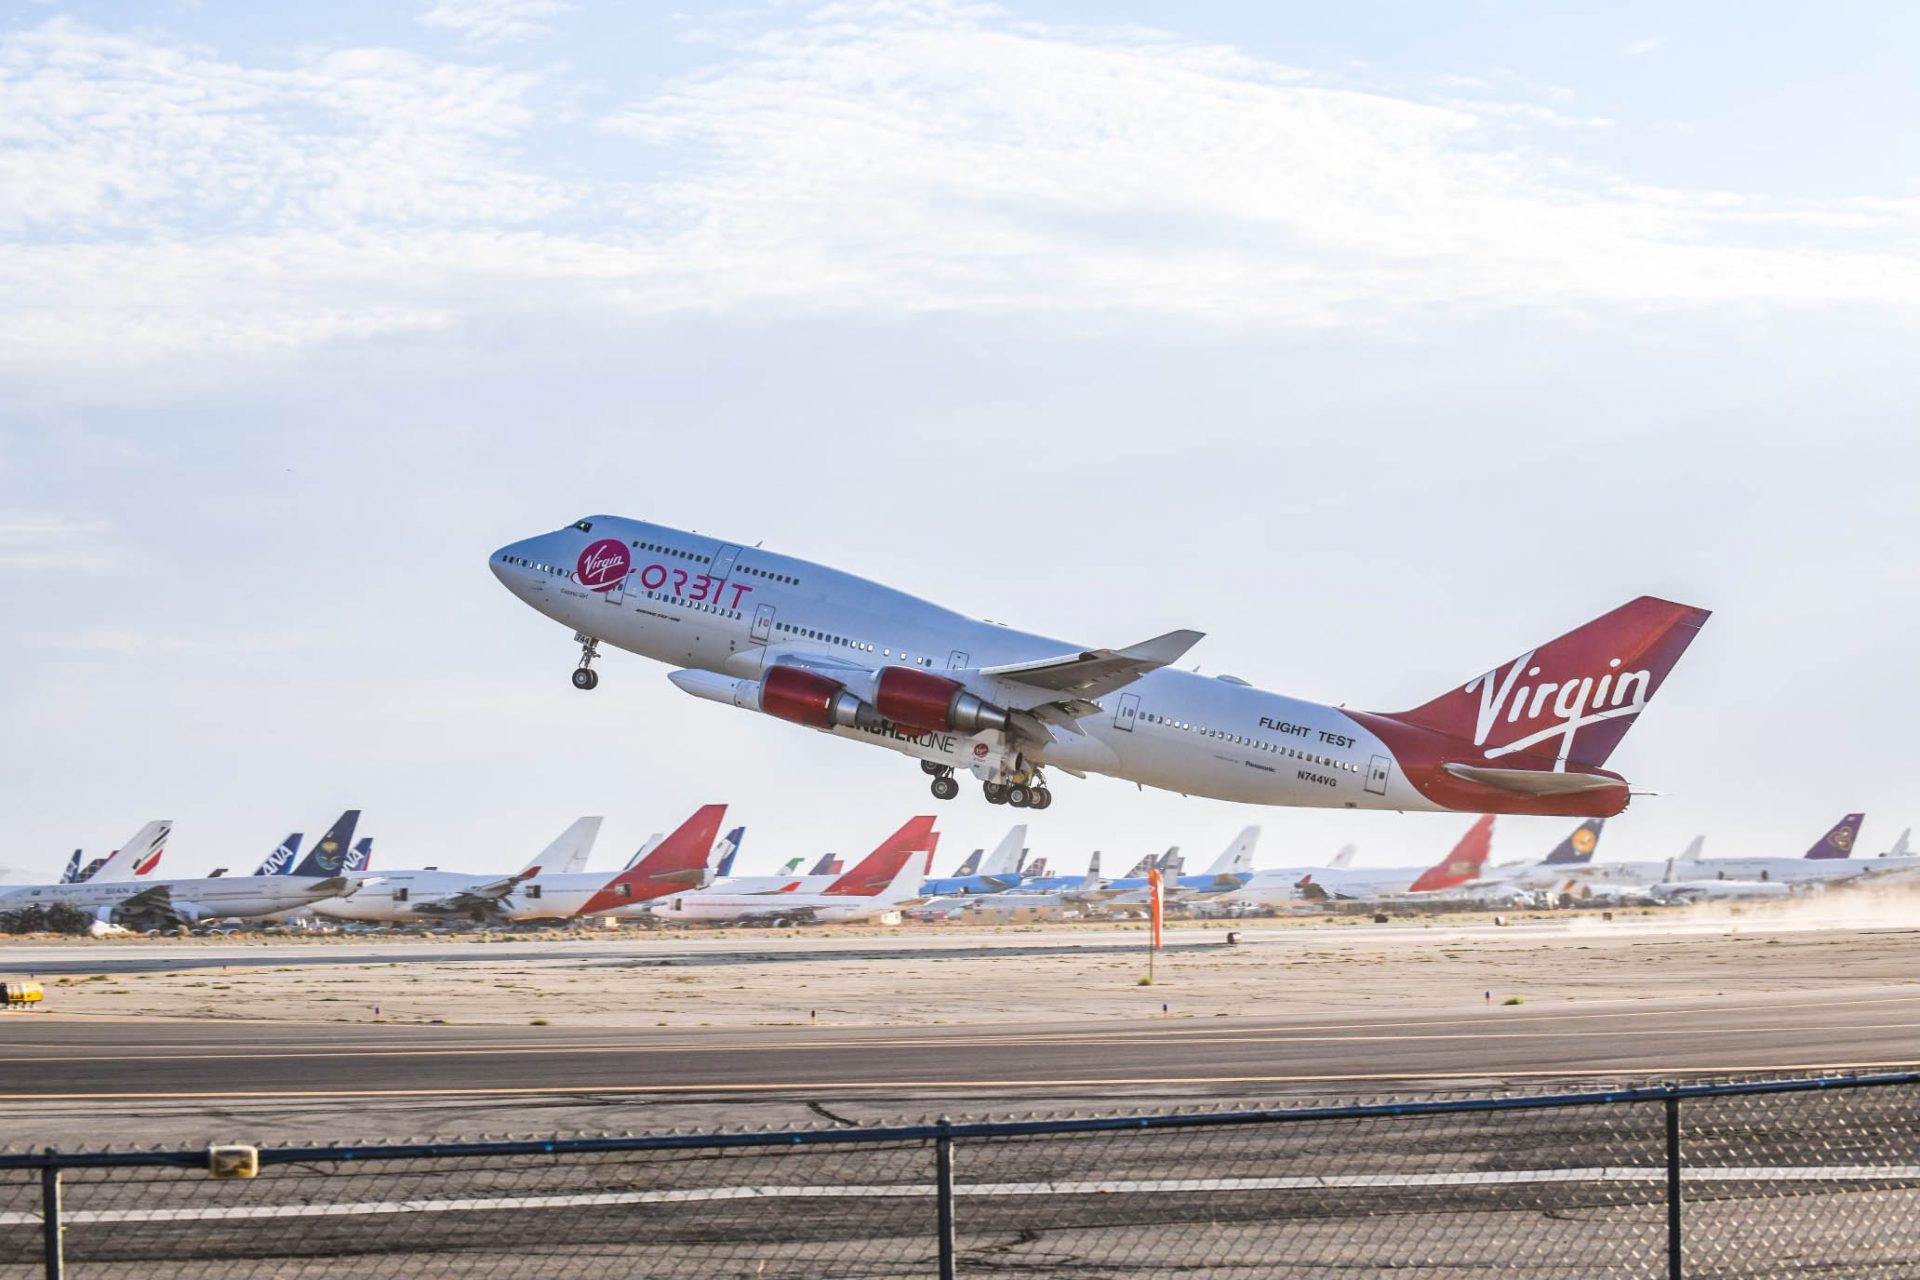 Virgin Orbit clears FAA hurdle for cramped satellite launches from Guam